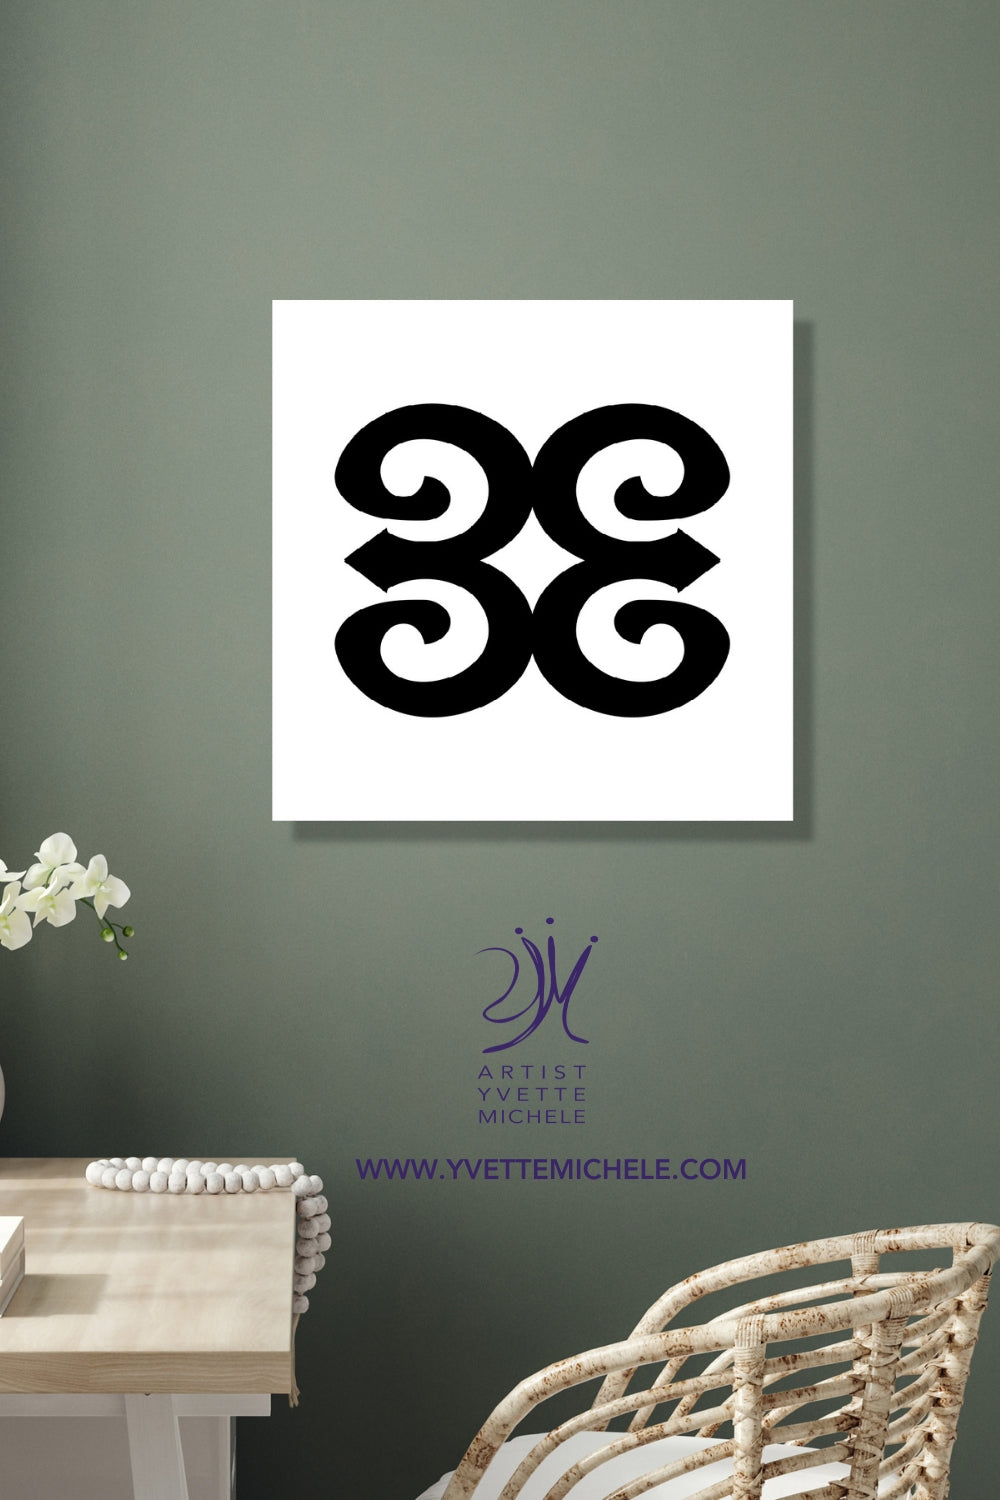 Adinkra African symbol AKOBEN -Horn 2 - Black and white large canvas wall art - House of Yvette Michele 